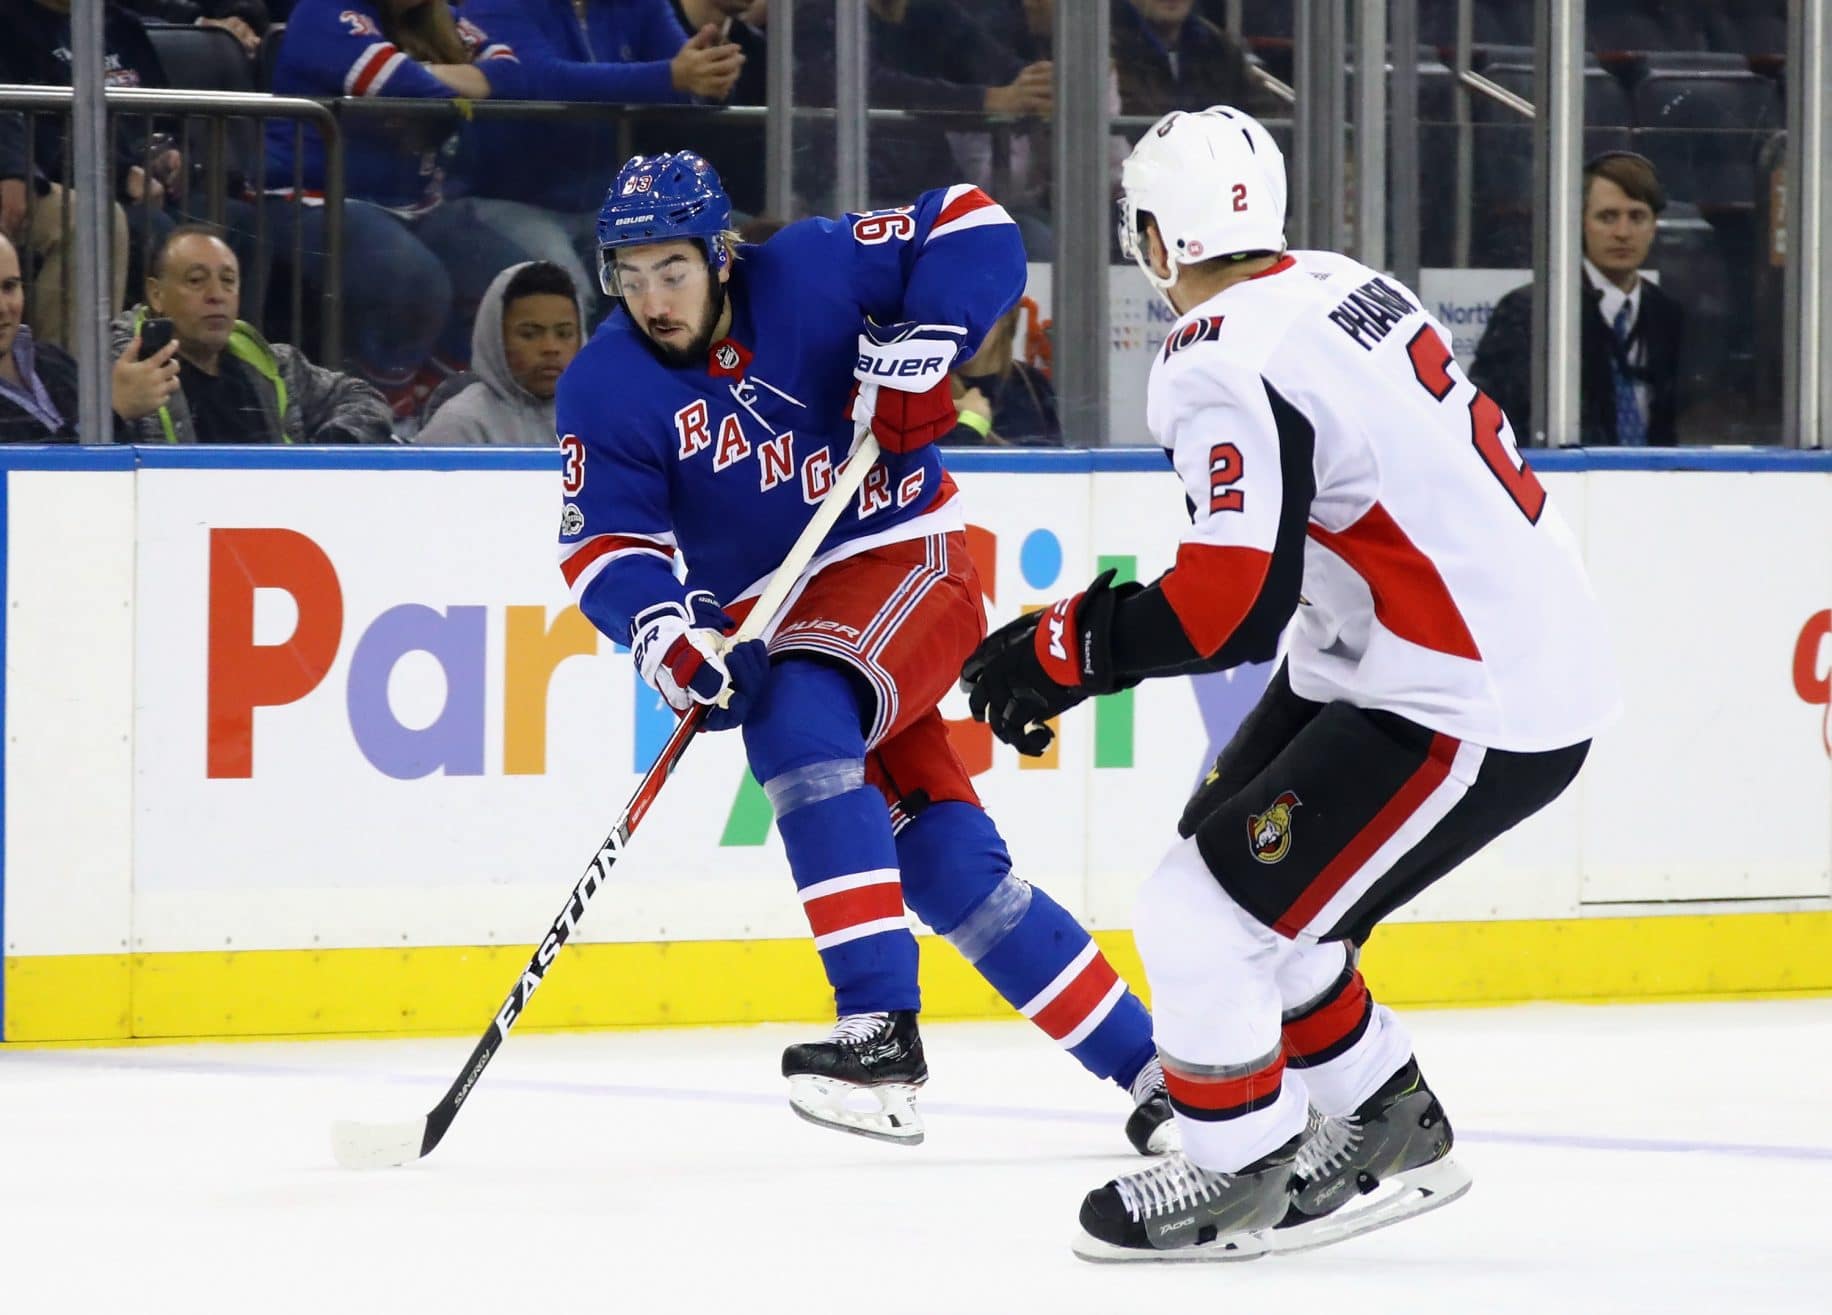 The New York Rangers must take their time with Mika Zibanejad